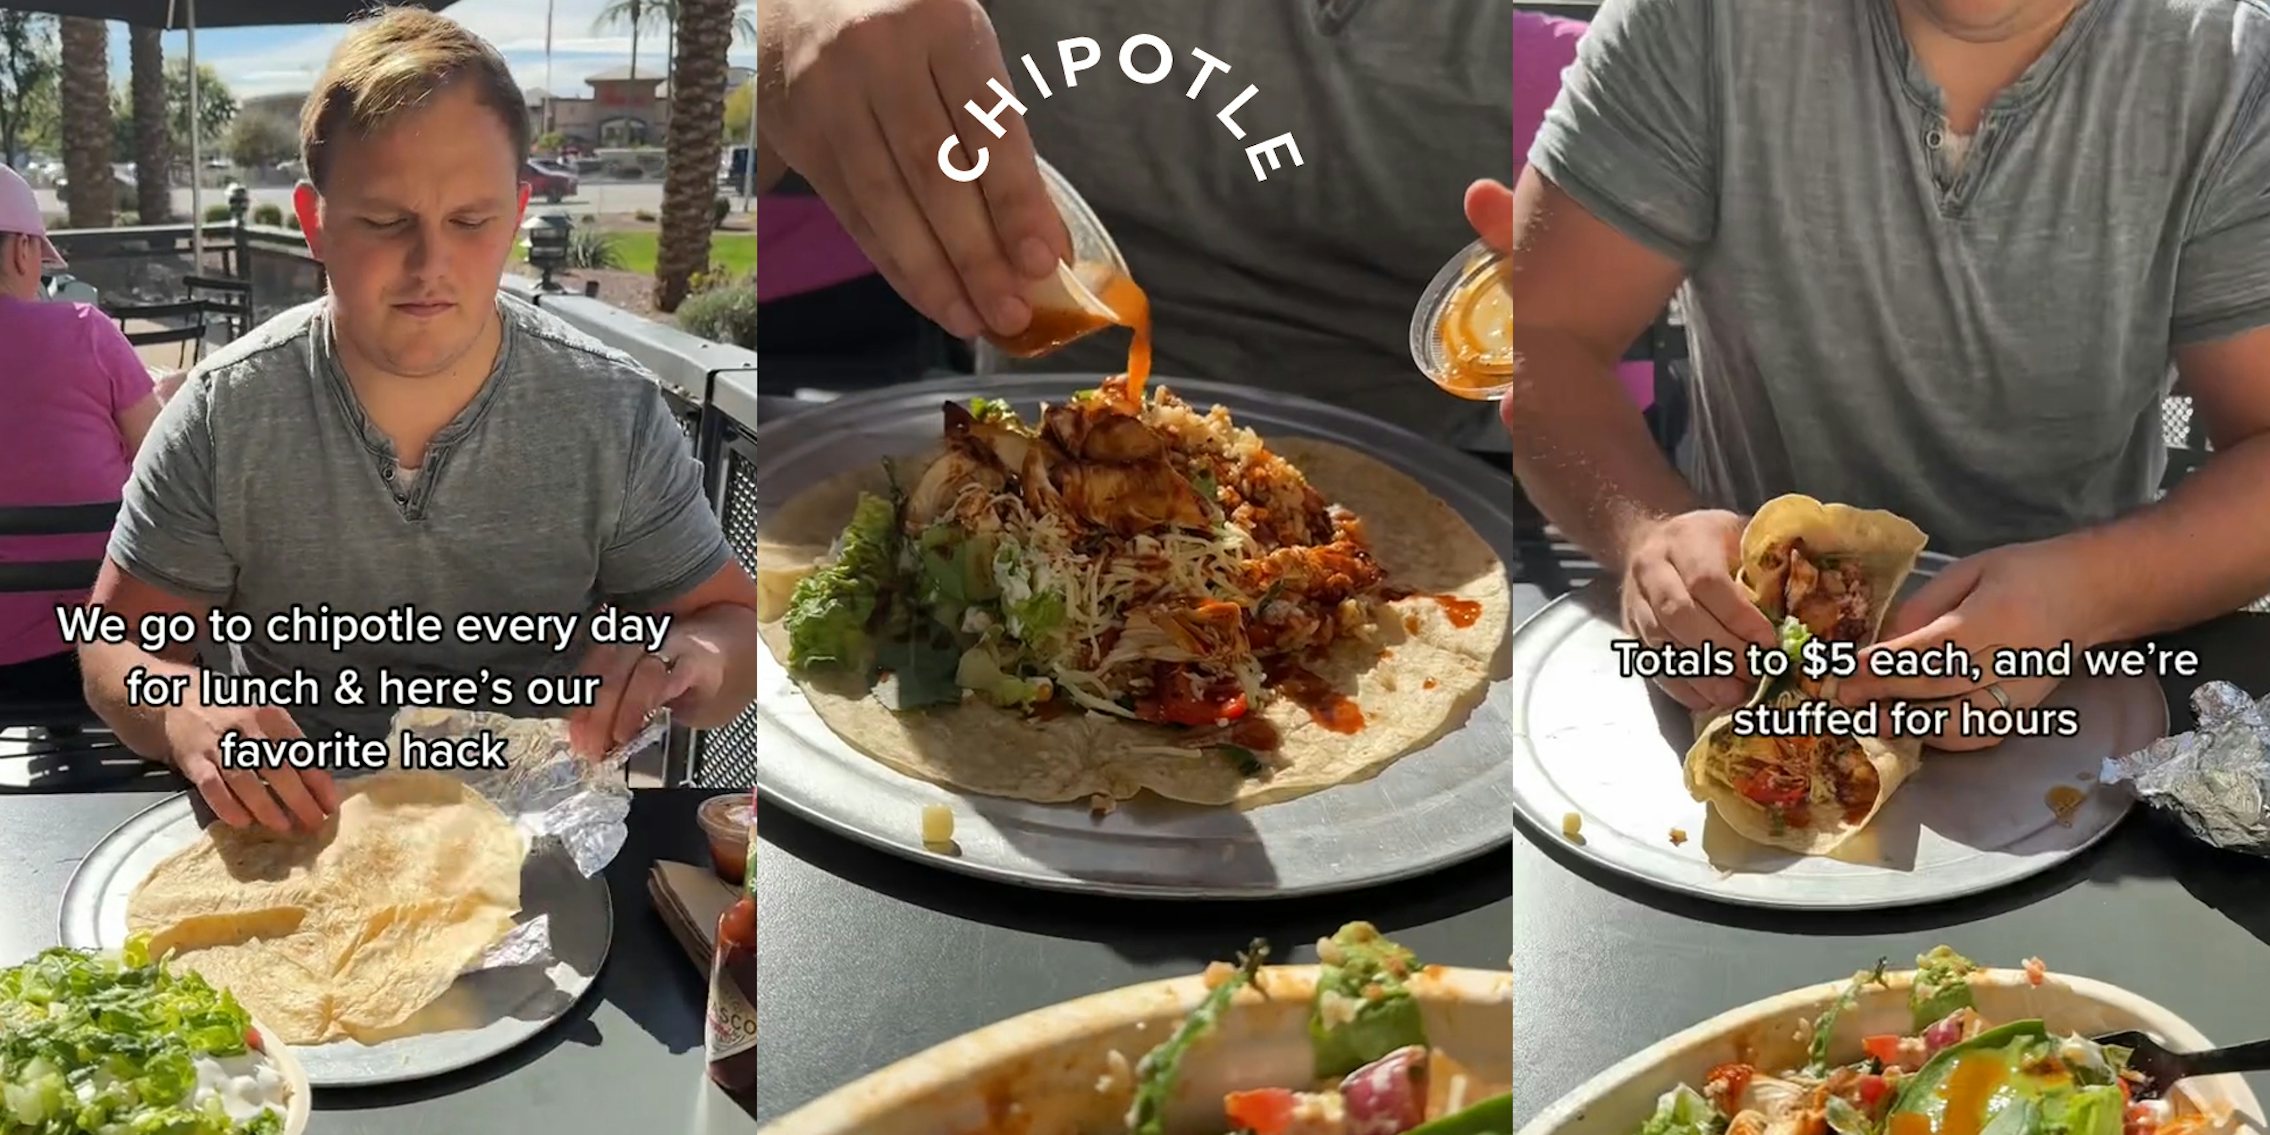 Chipotle customer with caption 'We go to chipotle every day for lunch & here's our favorite hack' (l) person putting sauce on Chipotle food with Chipotle logo above (c) Chipotle customer folding burrito with caption 'Totals to $5 each, and we're stuffed for hours' (r)